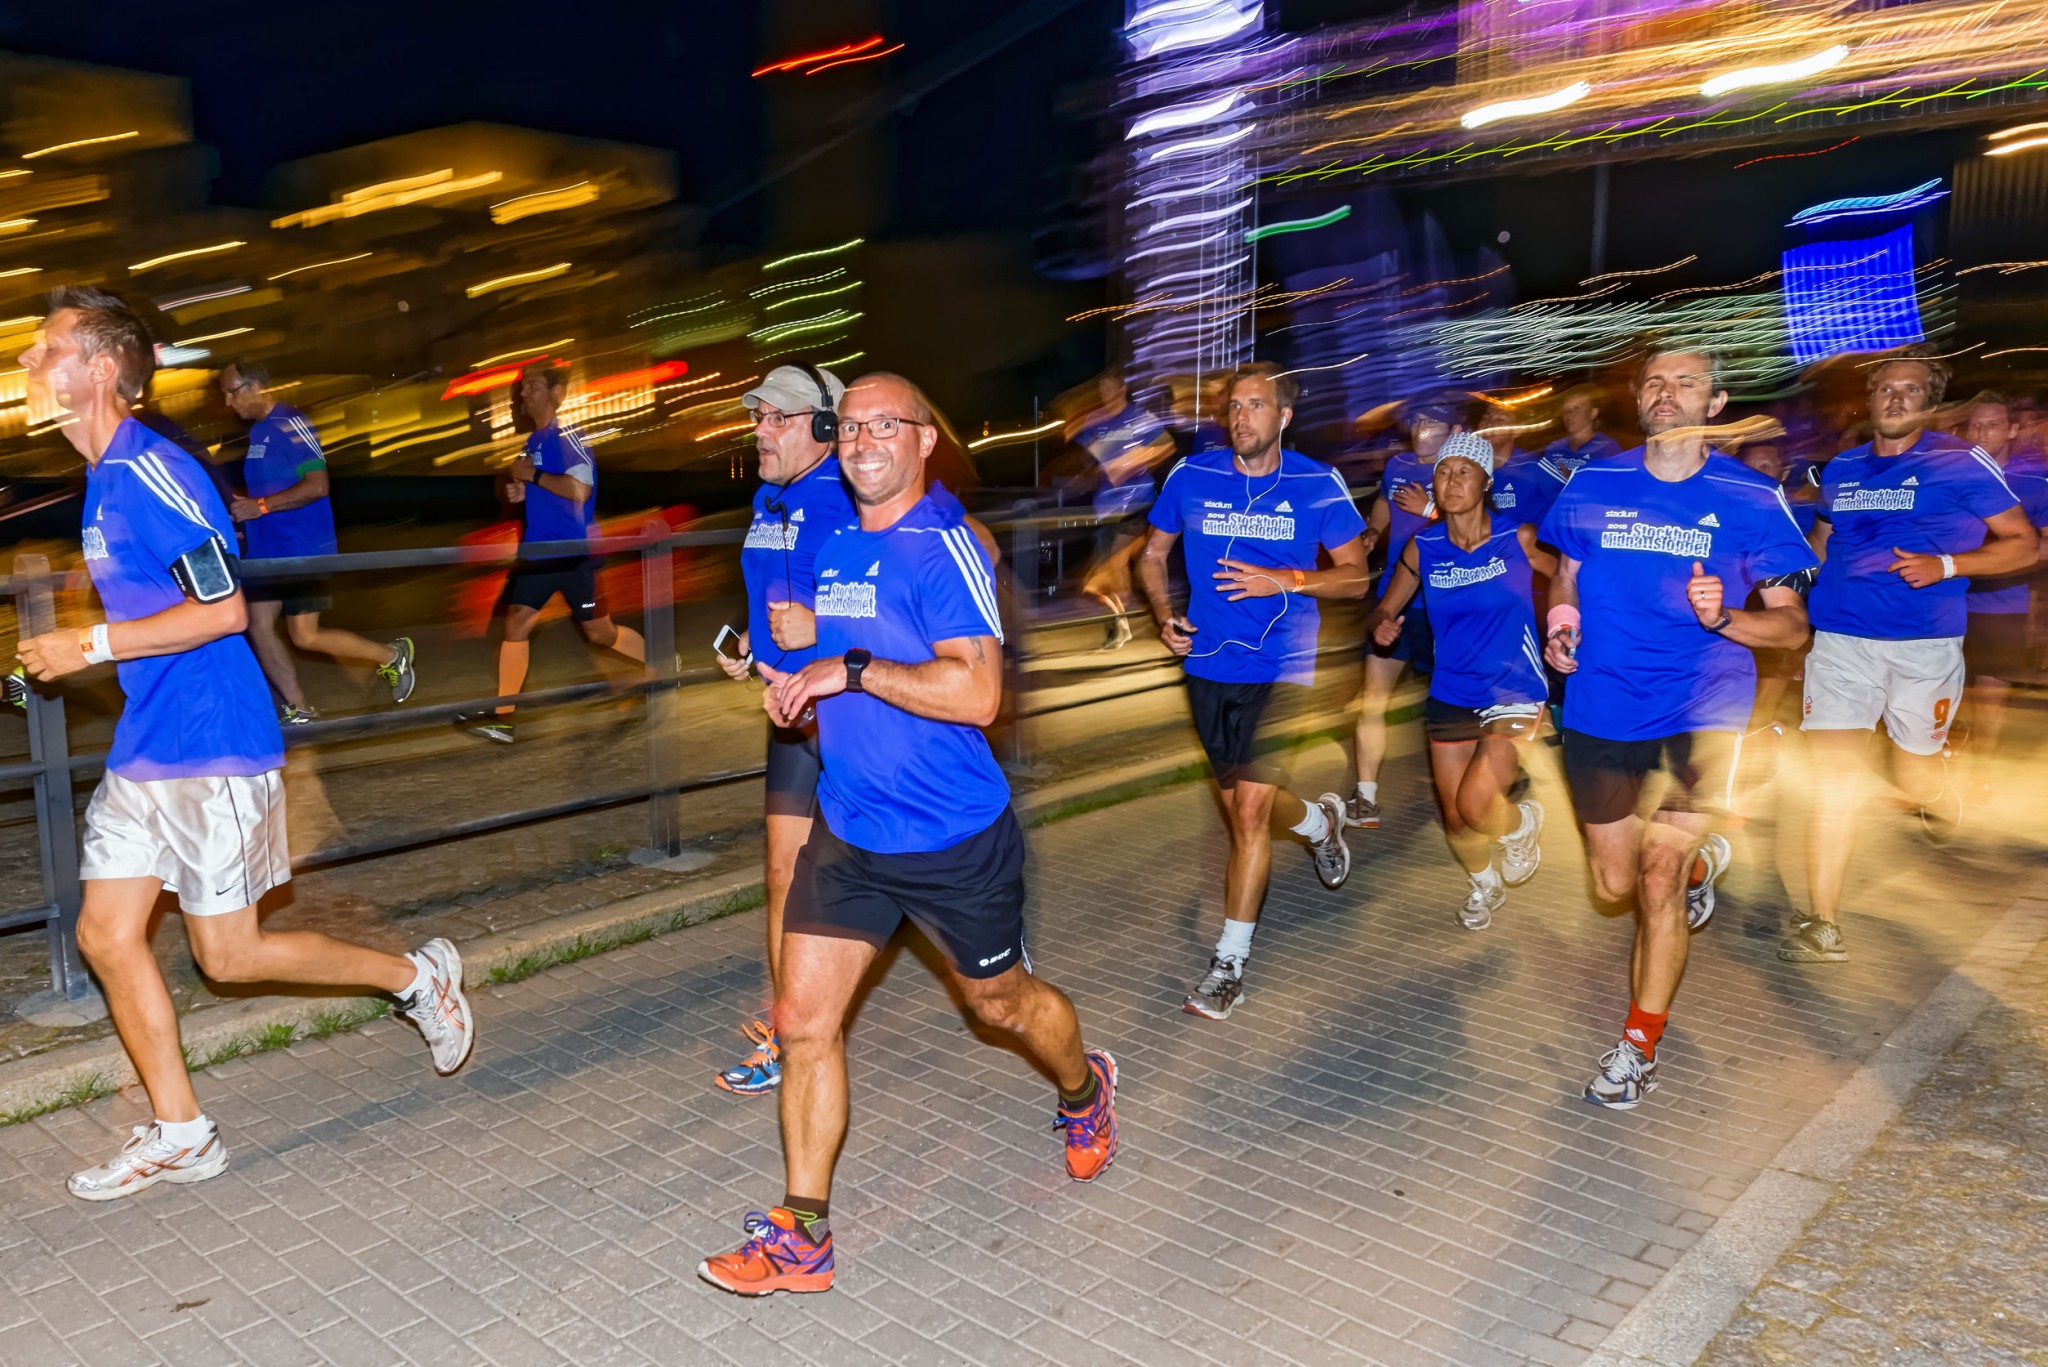 runners-at-night-race